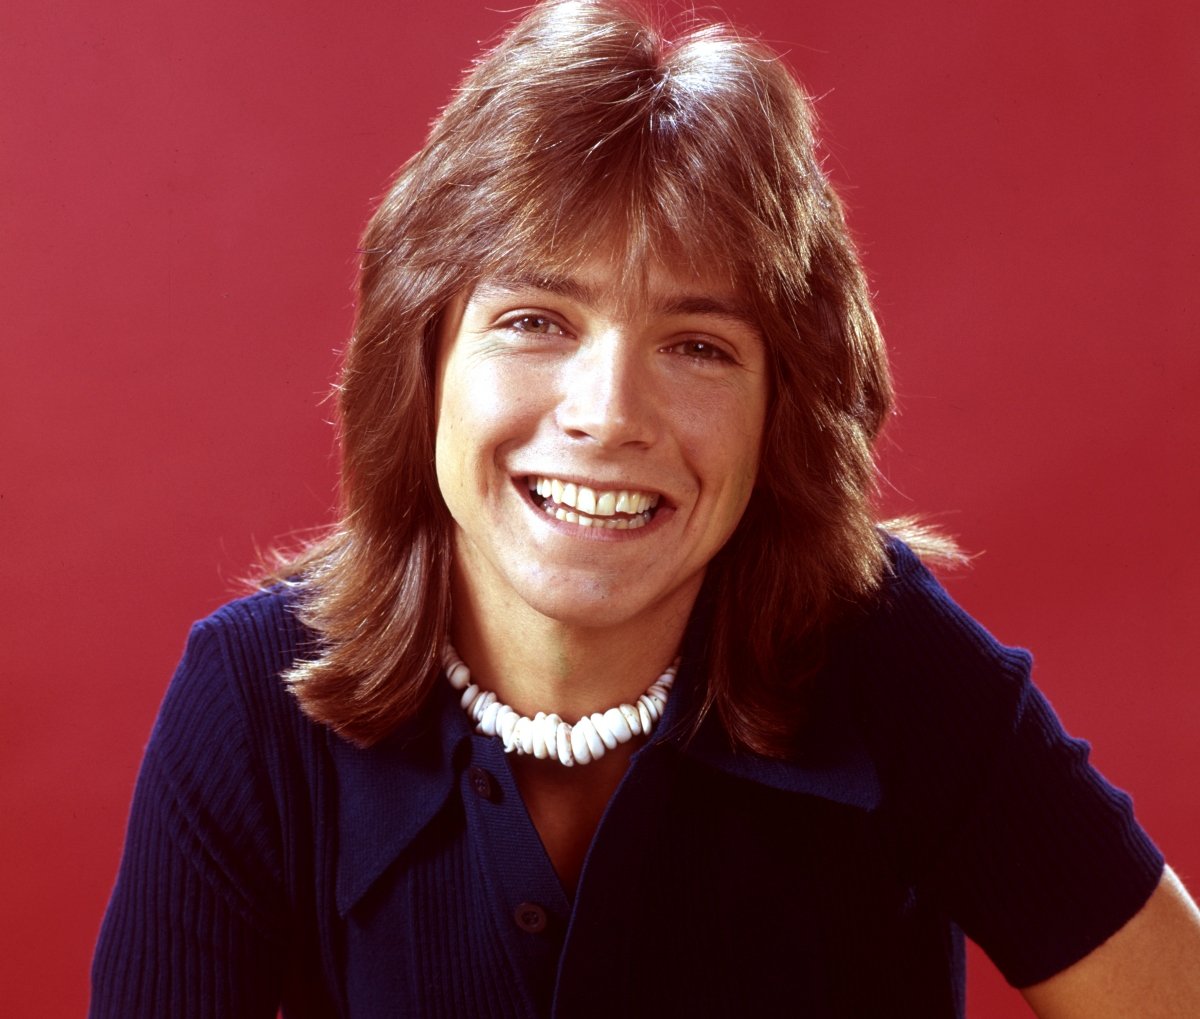 David Cassidy of 'The Partridge Family'